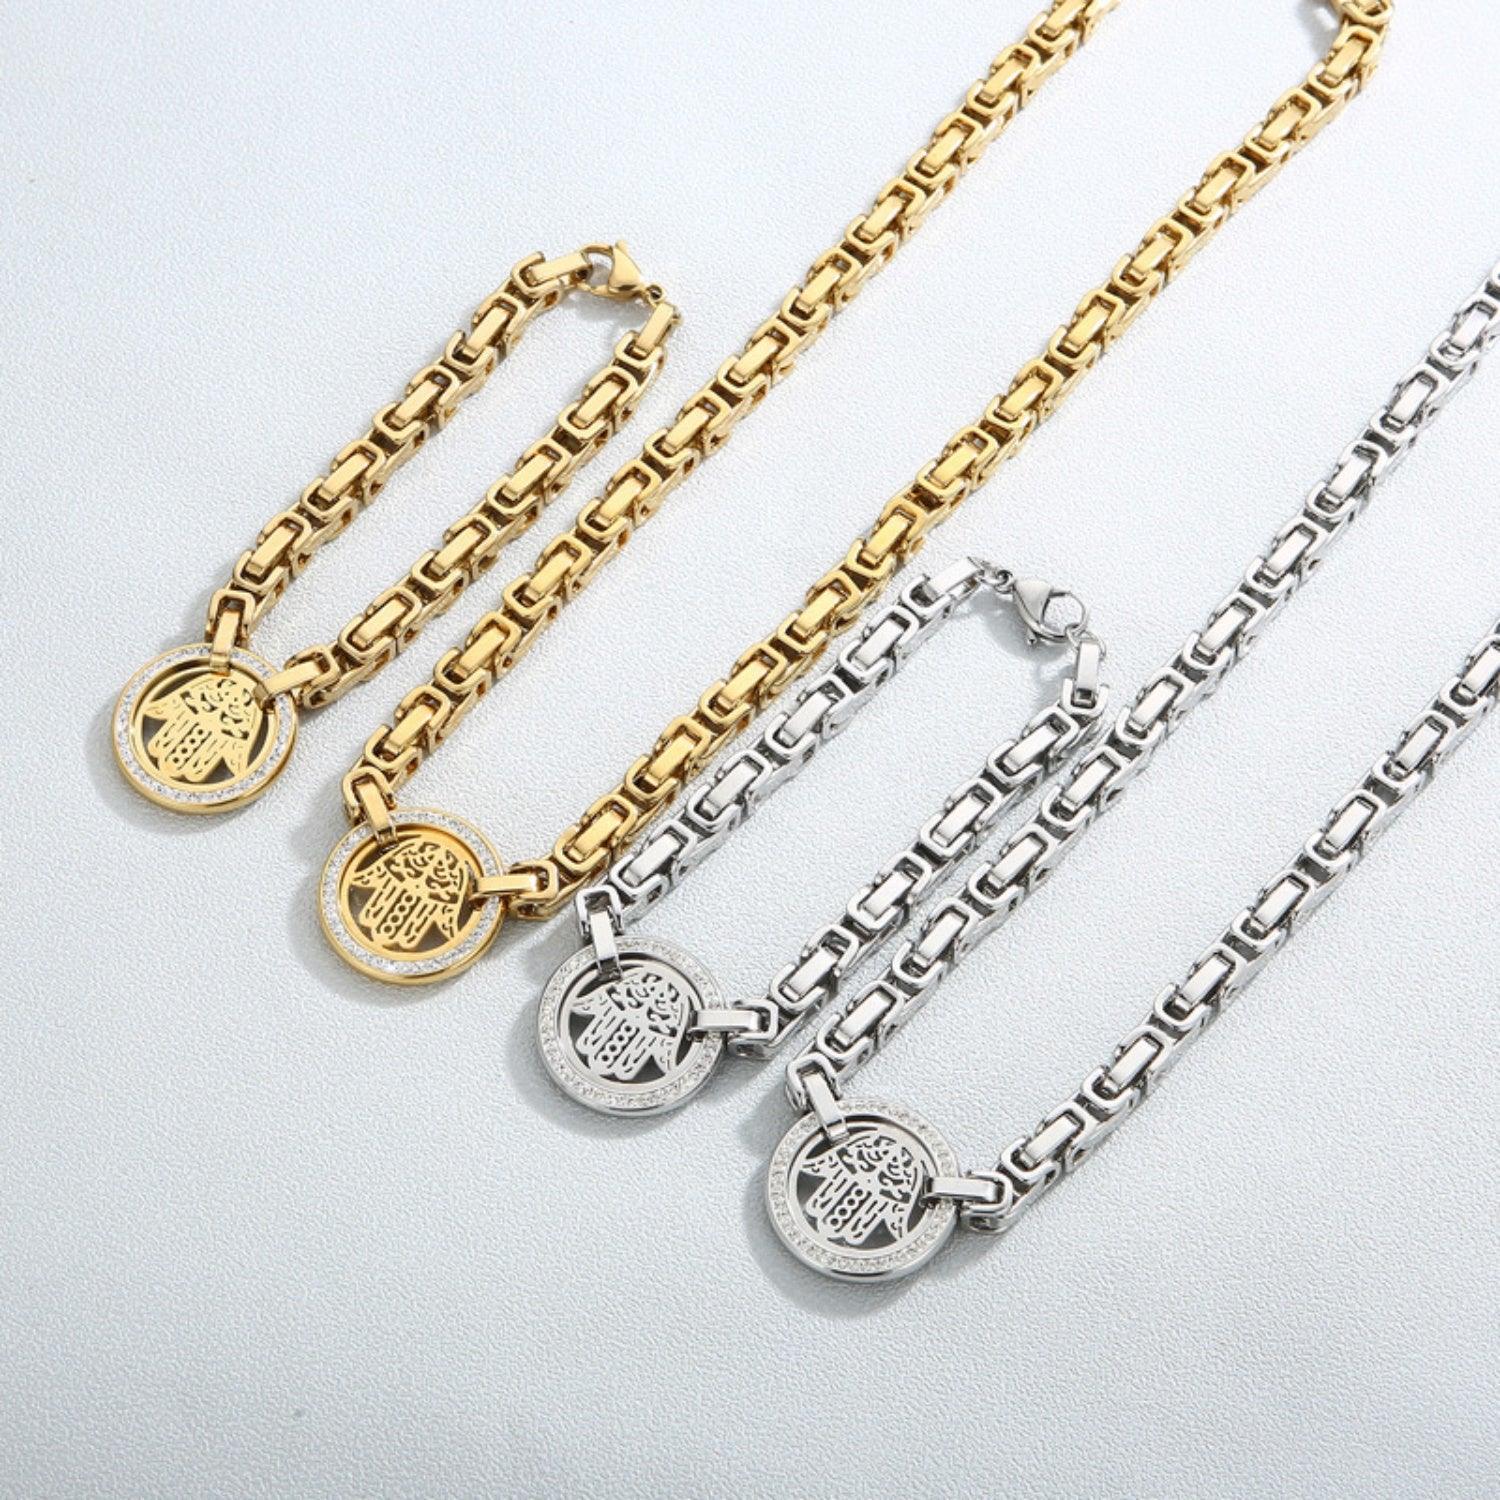 four different types of necklaces on a white surface